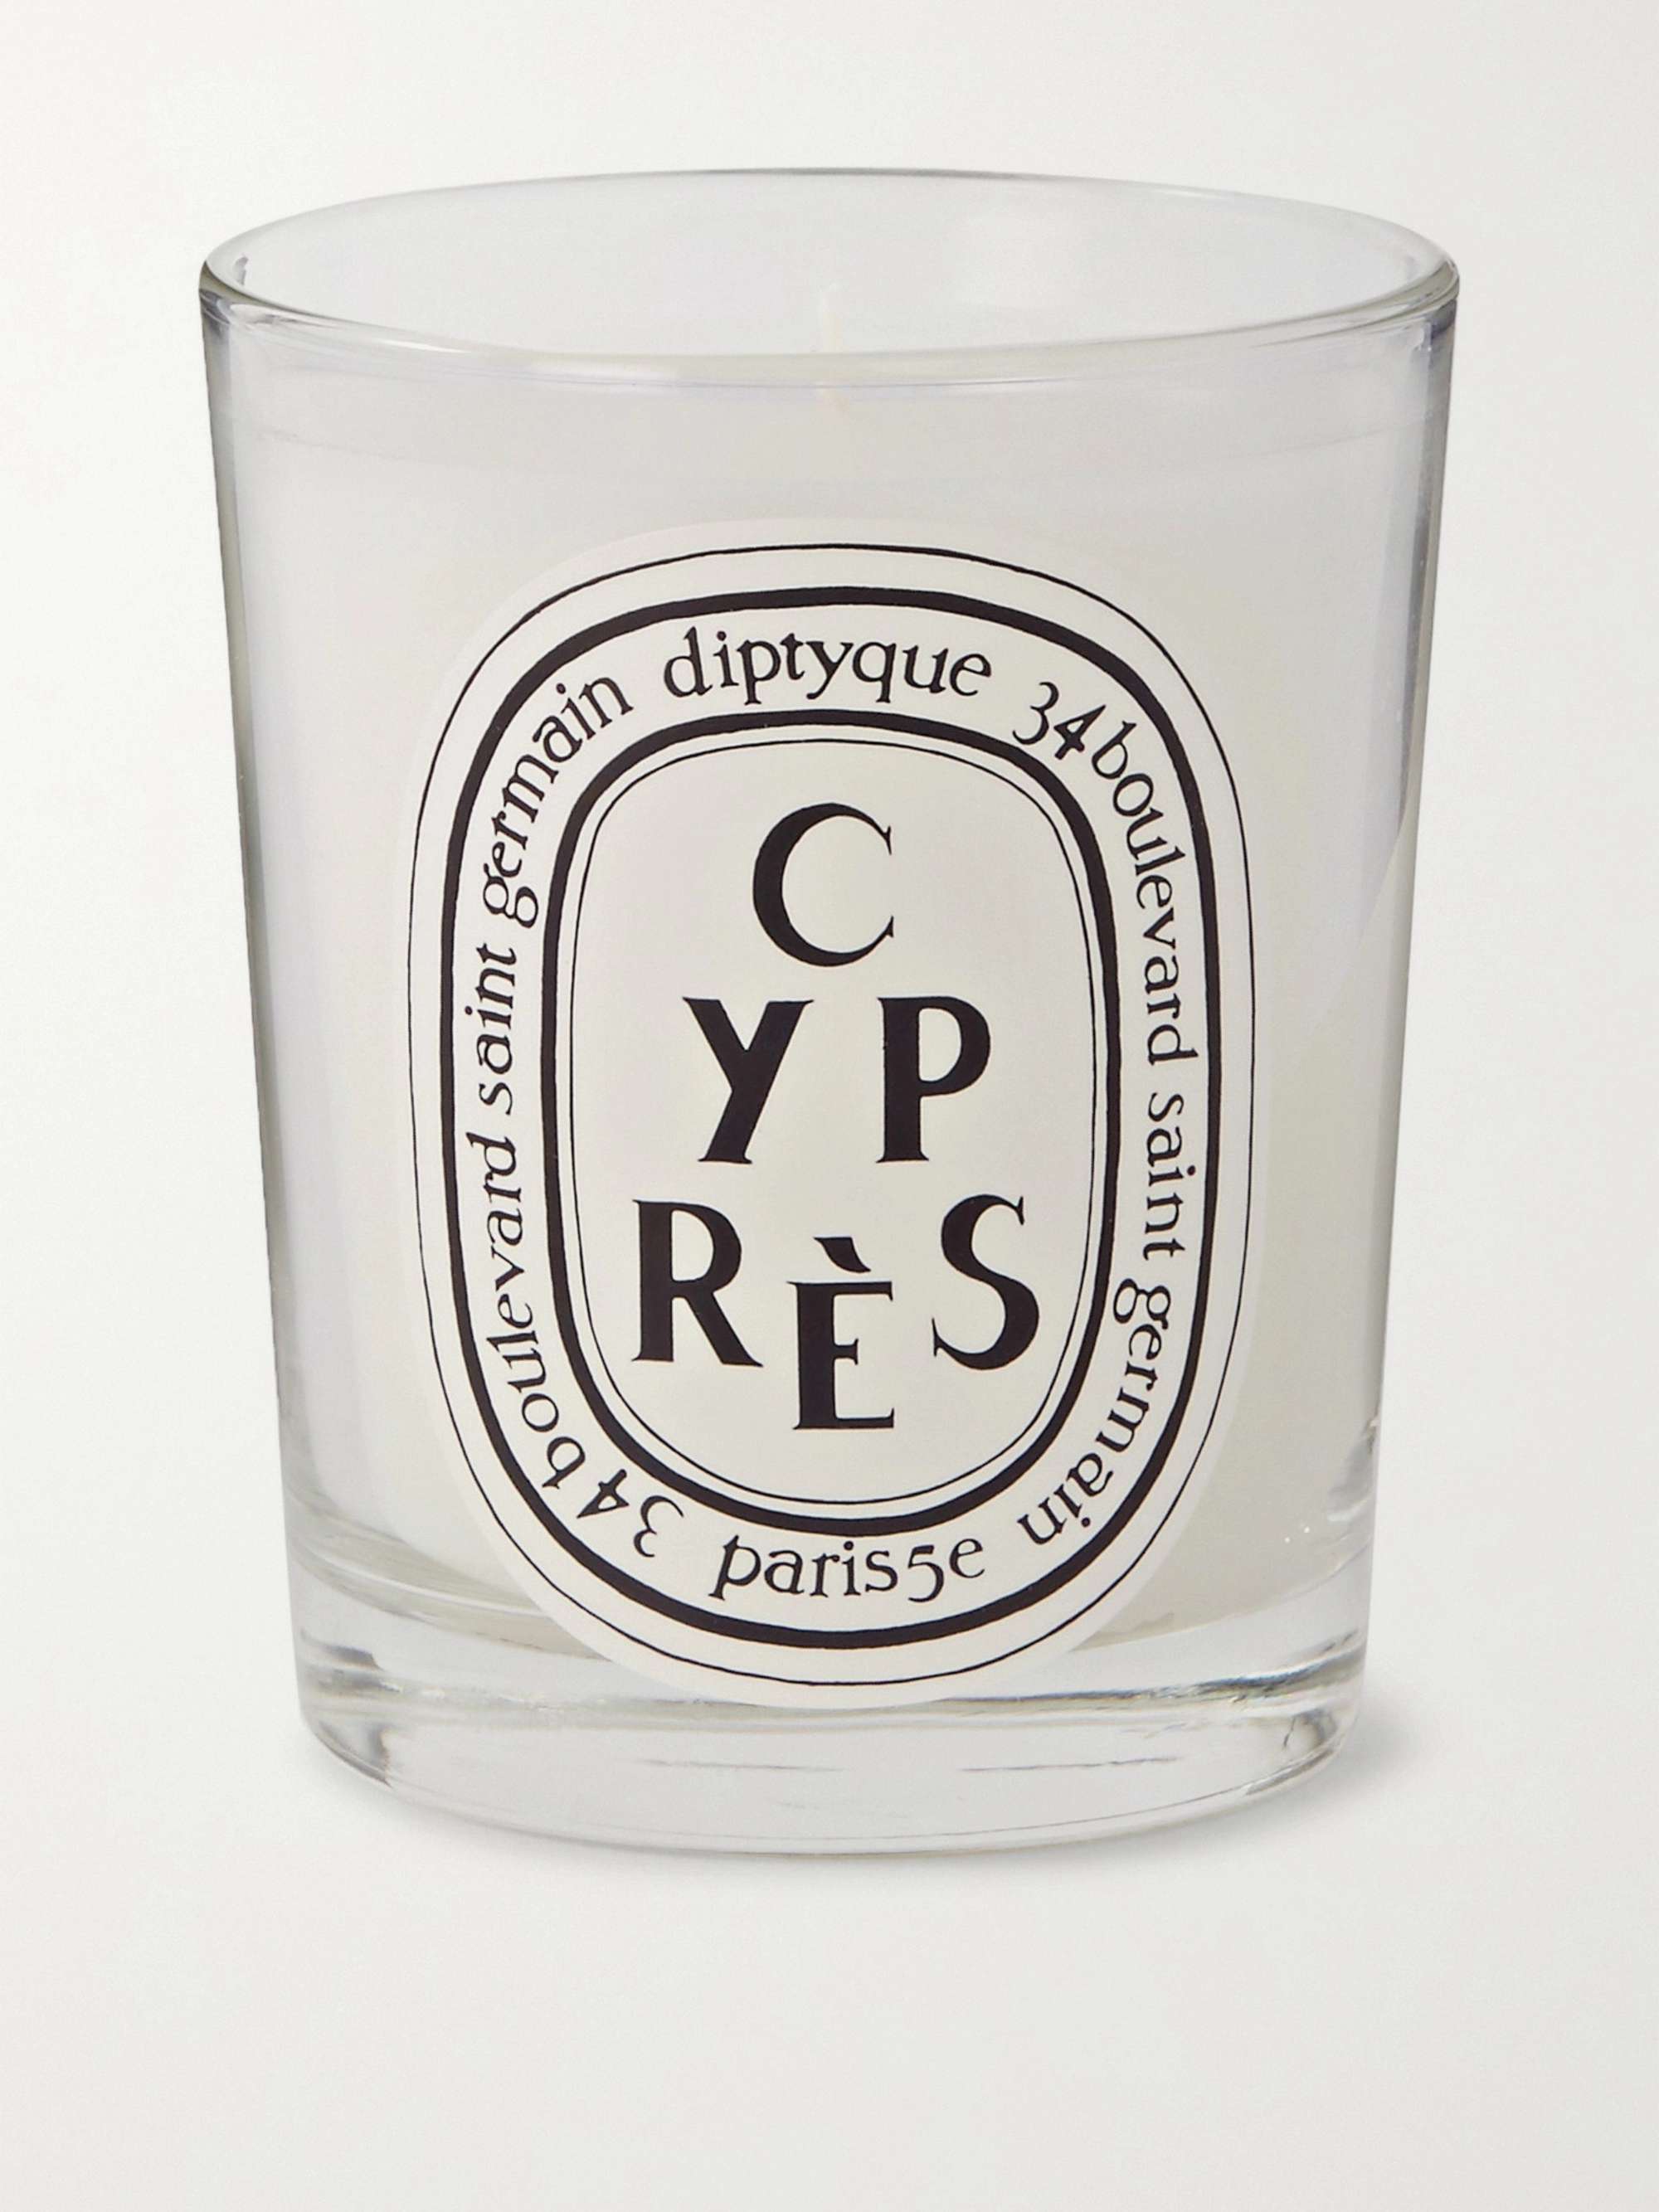 DIPTYQUE Cyprès Scented Candle, 190g